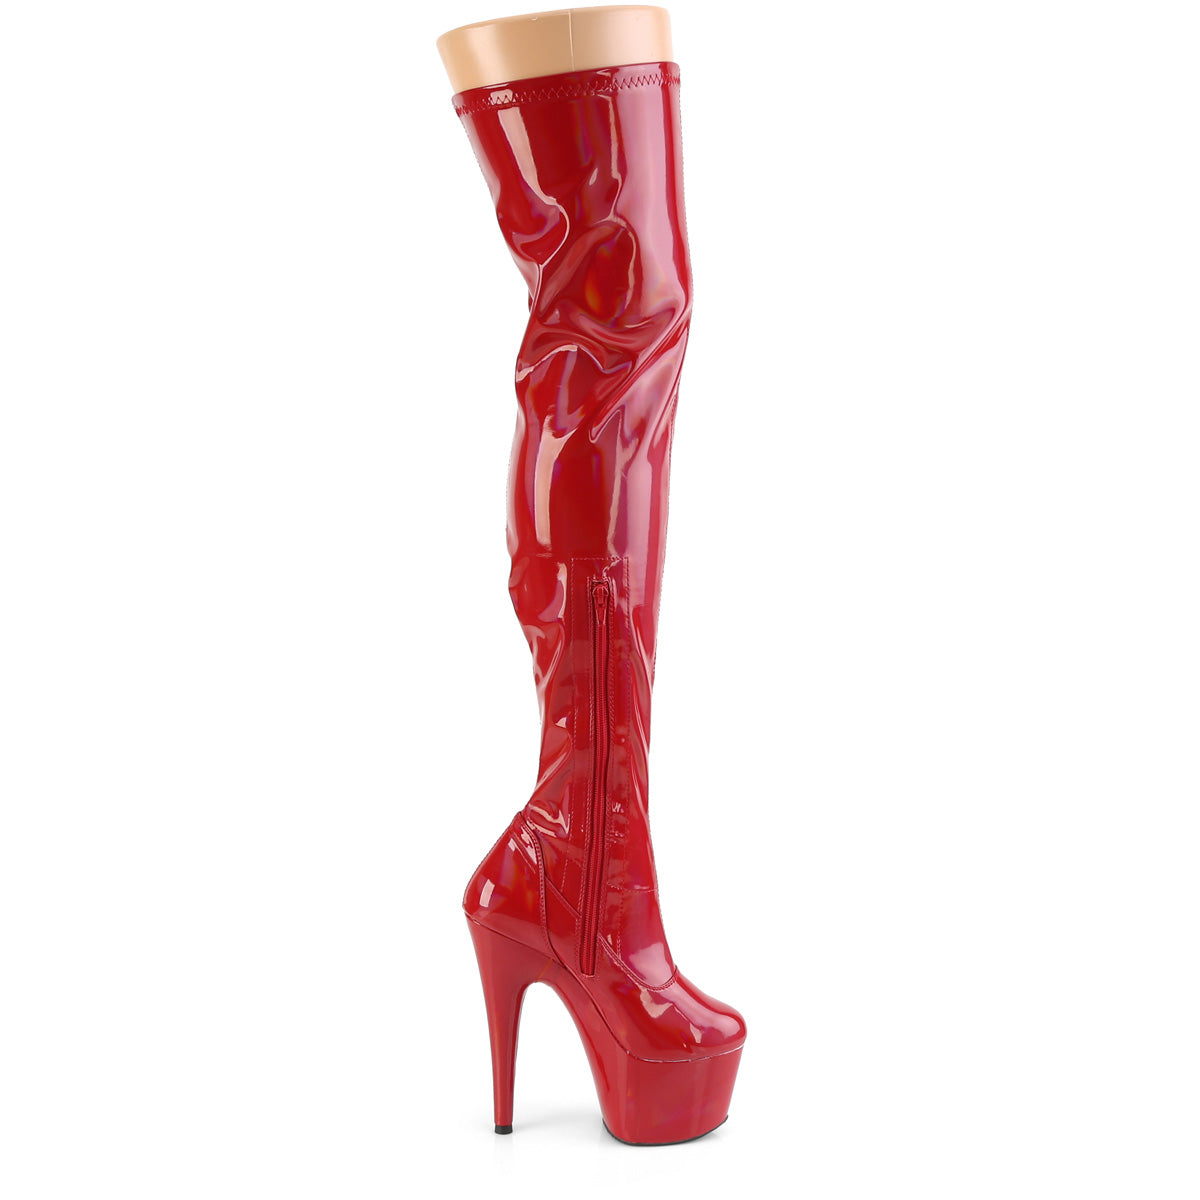 ADORE-3000HWR Pleaser 7" Heel Red Pole Dancing Thigh Highs-Pleaser- Sexy Shoes Fetish Heels